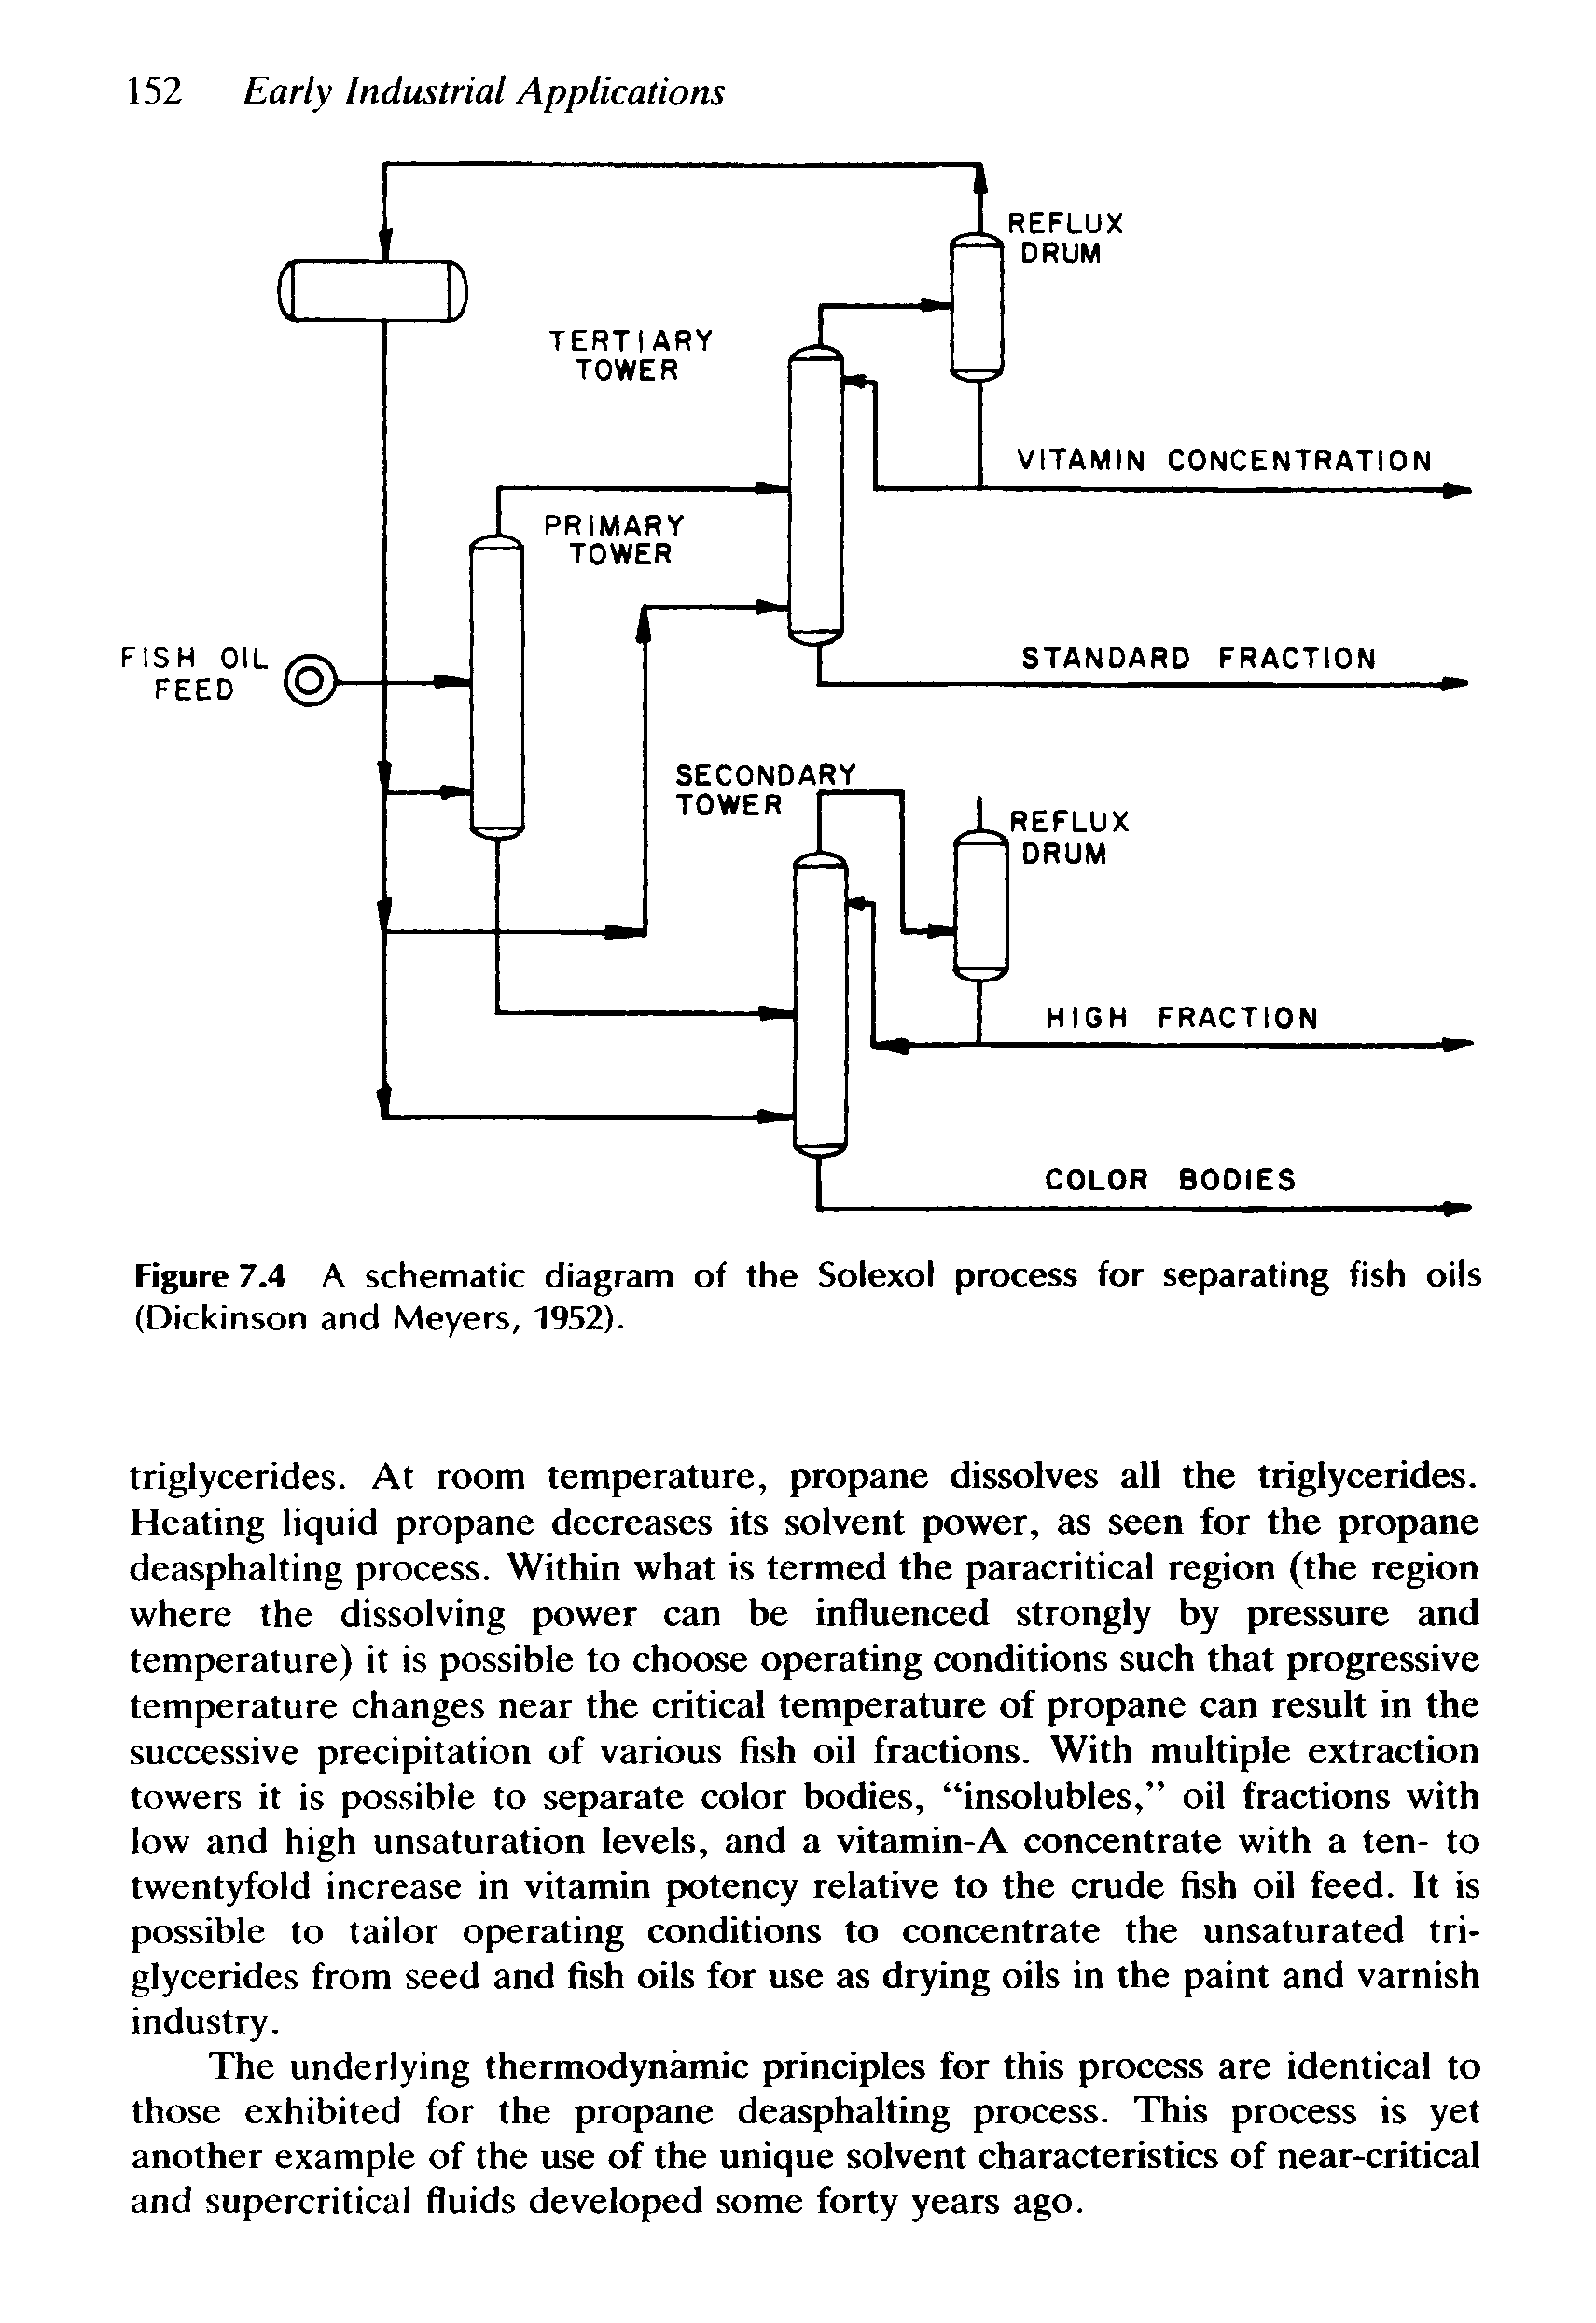 Figure 7.4 A schematic diagram of the Solexol process for separating fish oils (Dickinson and Meyers, 1952).